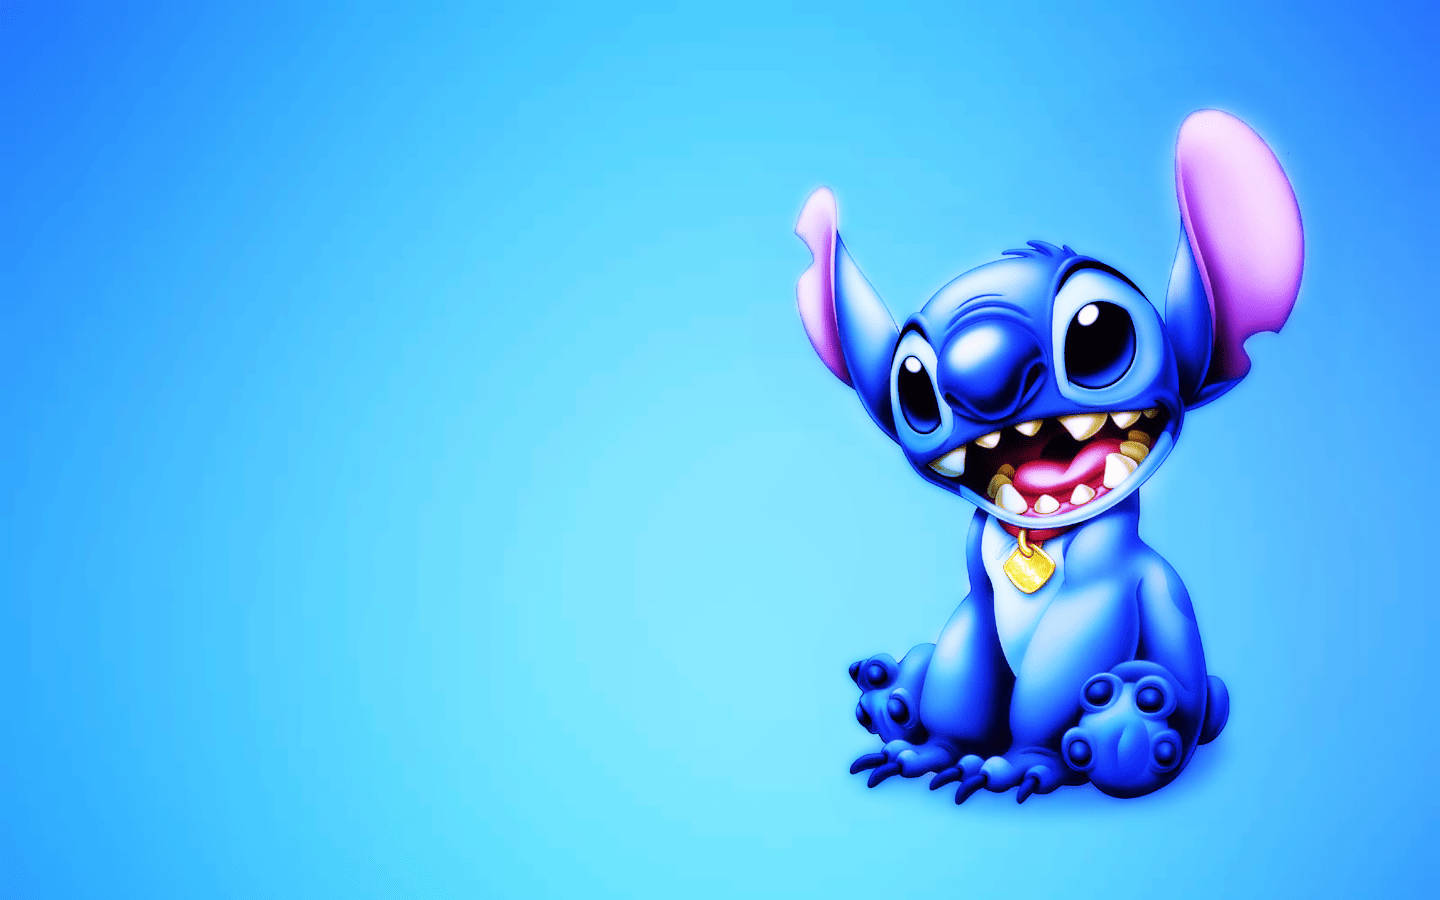 Cute Stitch With Big Ears Wallpaper